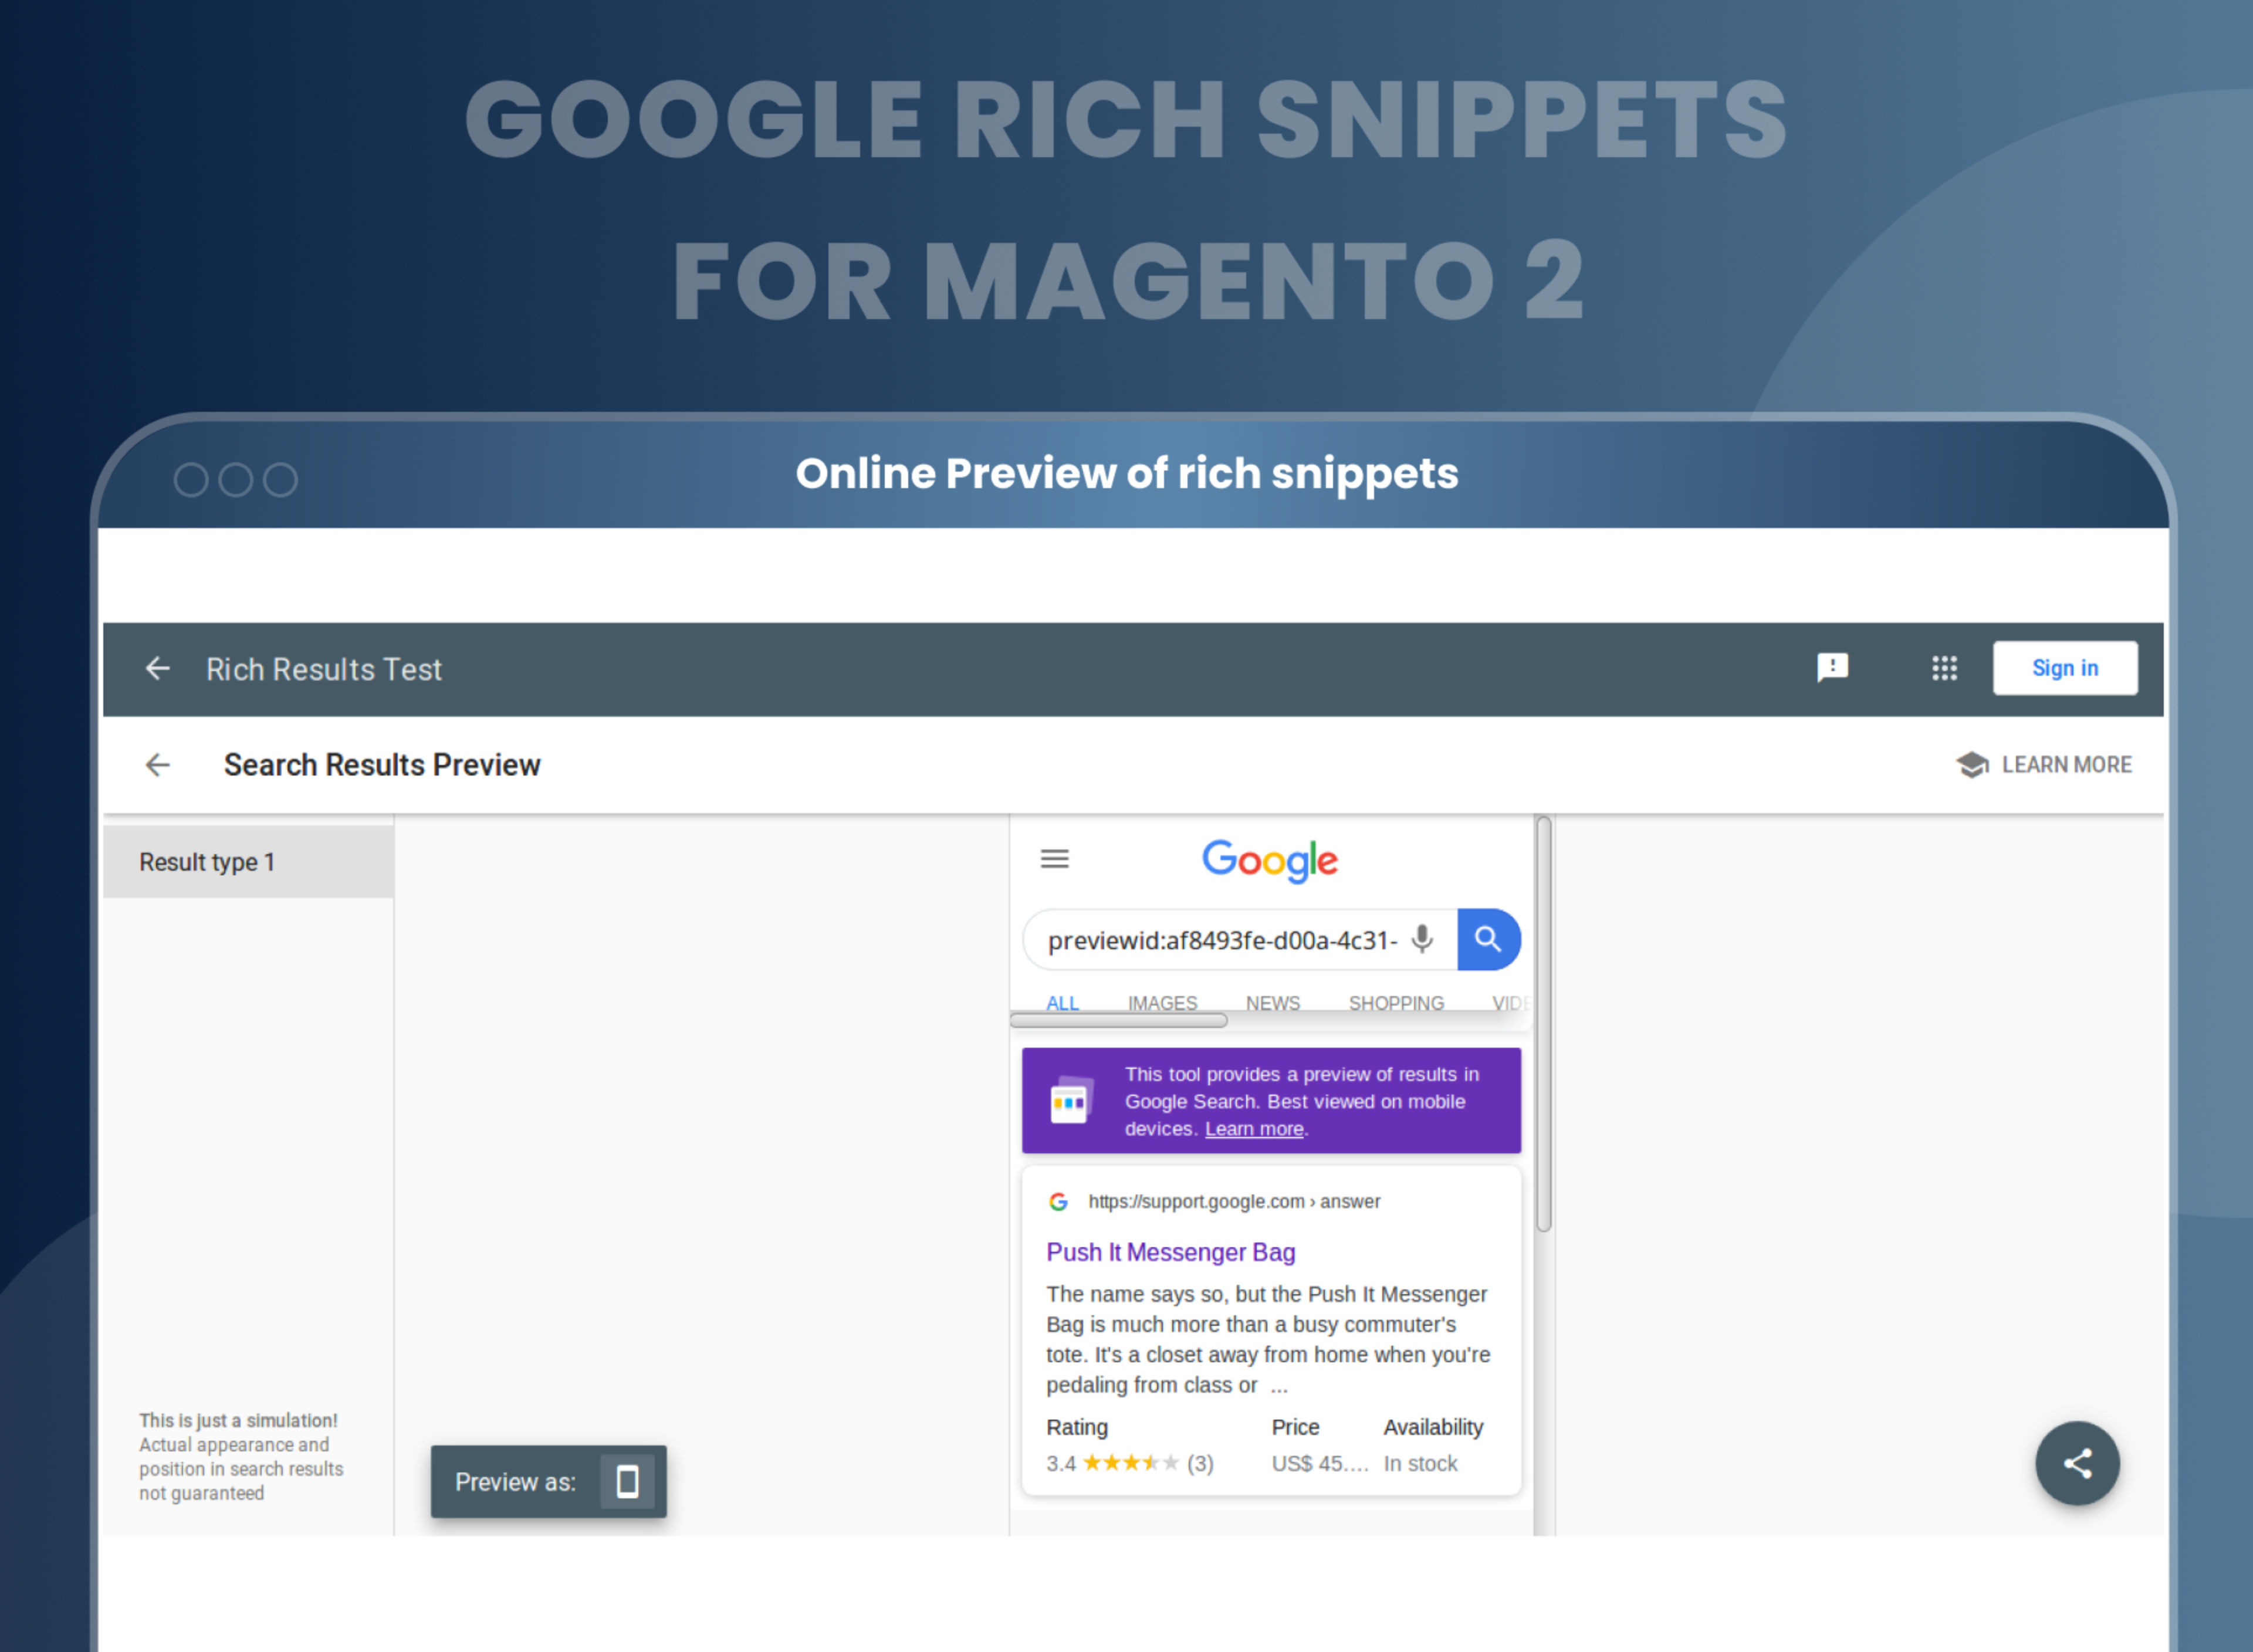 Online Preview of rich snippets